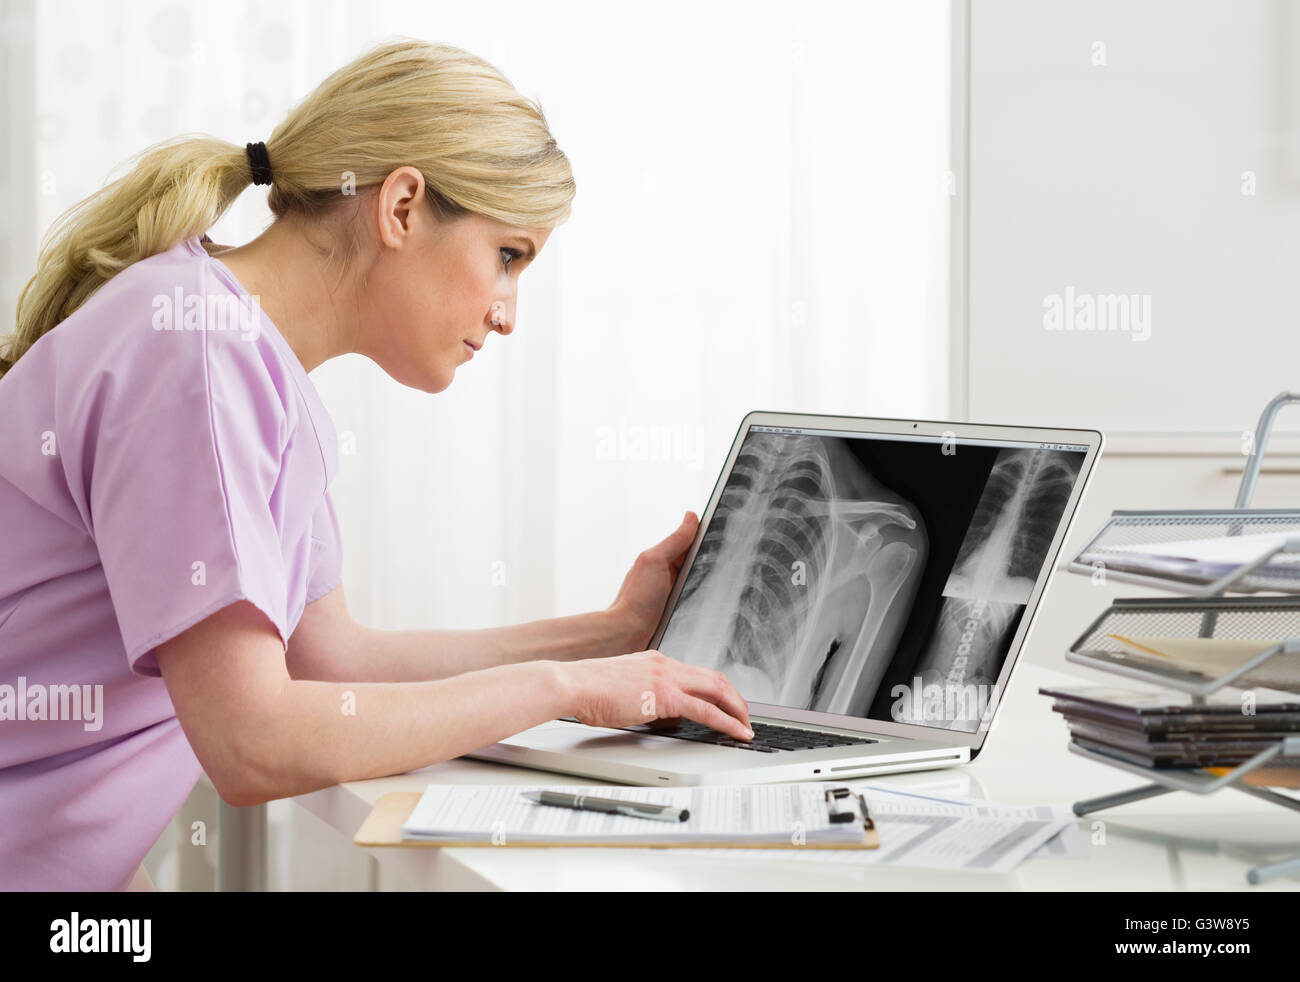 Female doctor analyzing X-ray image on computer screen Stock Photo